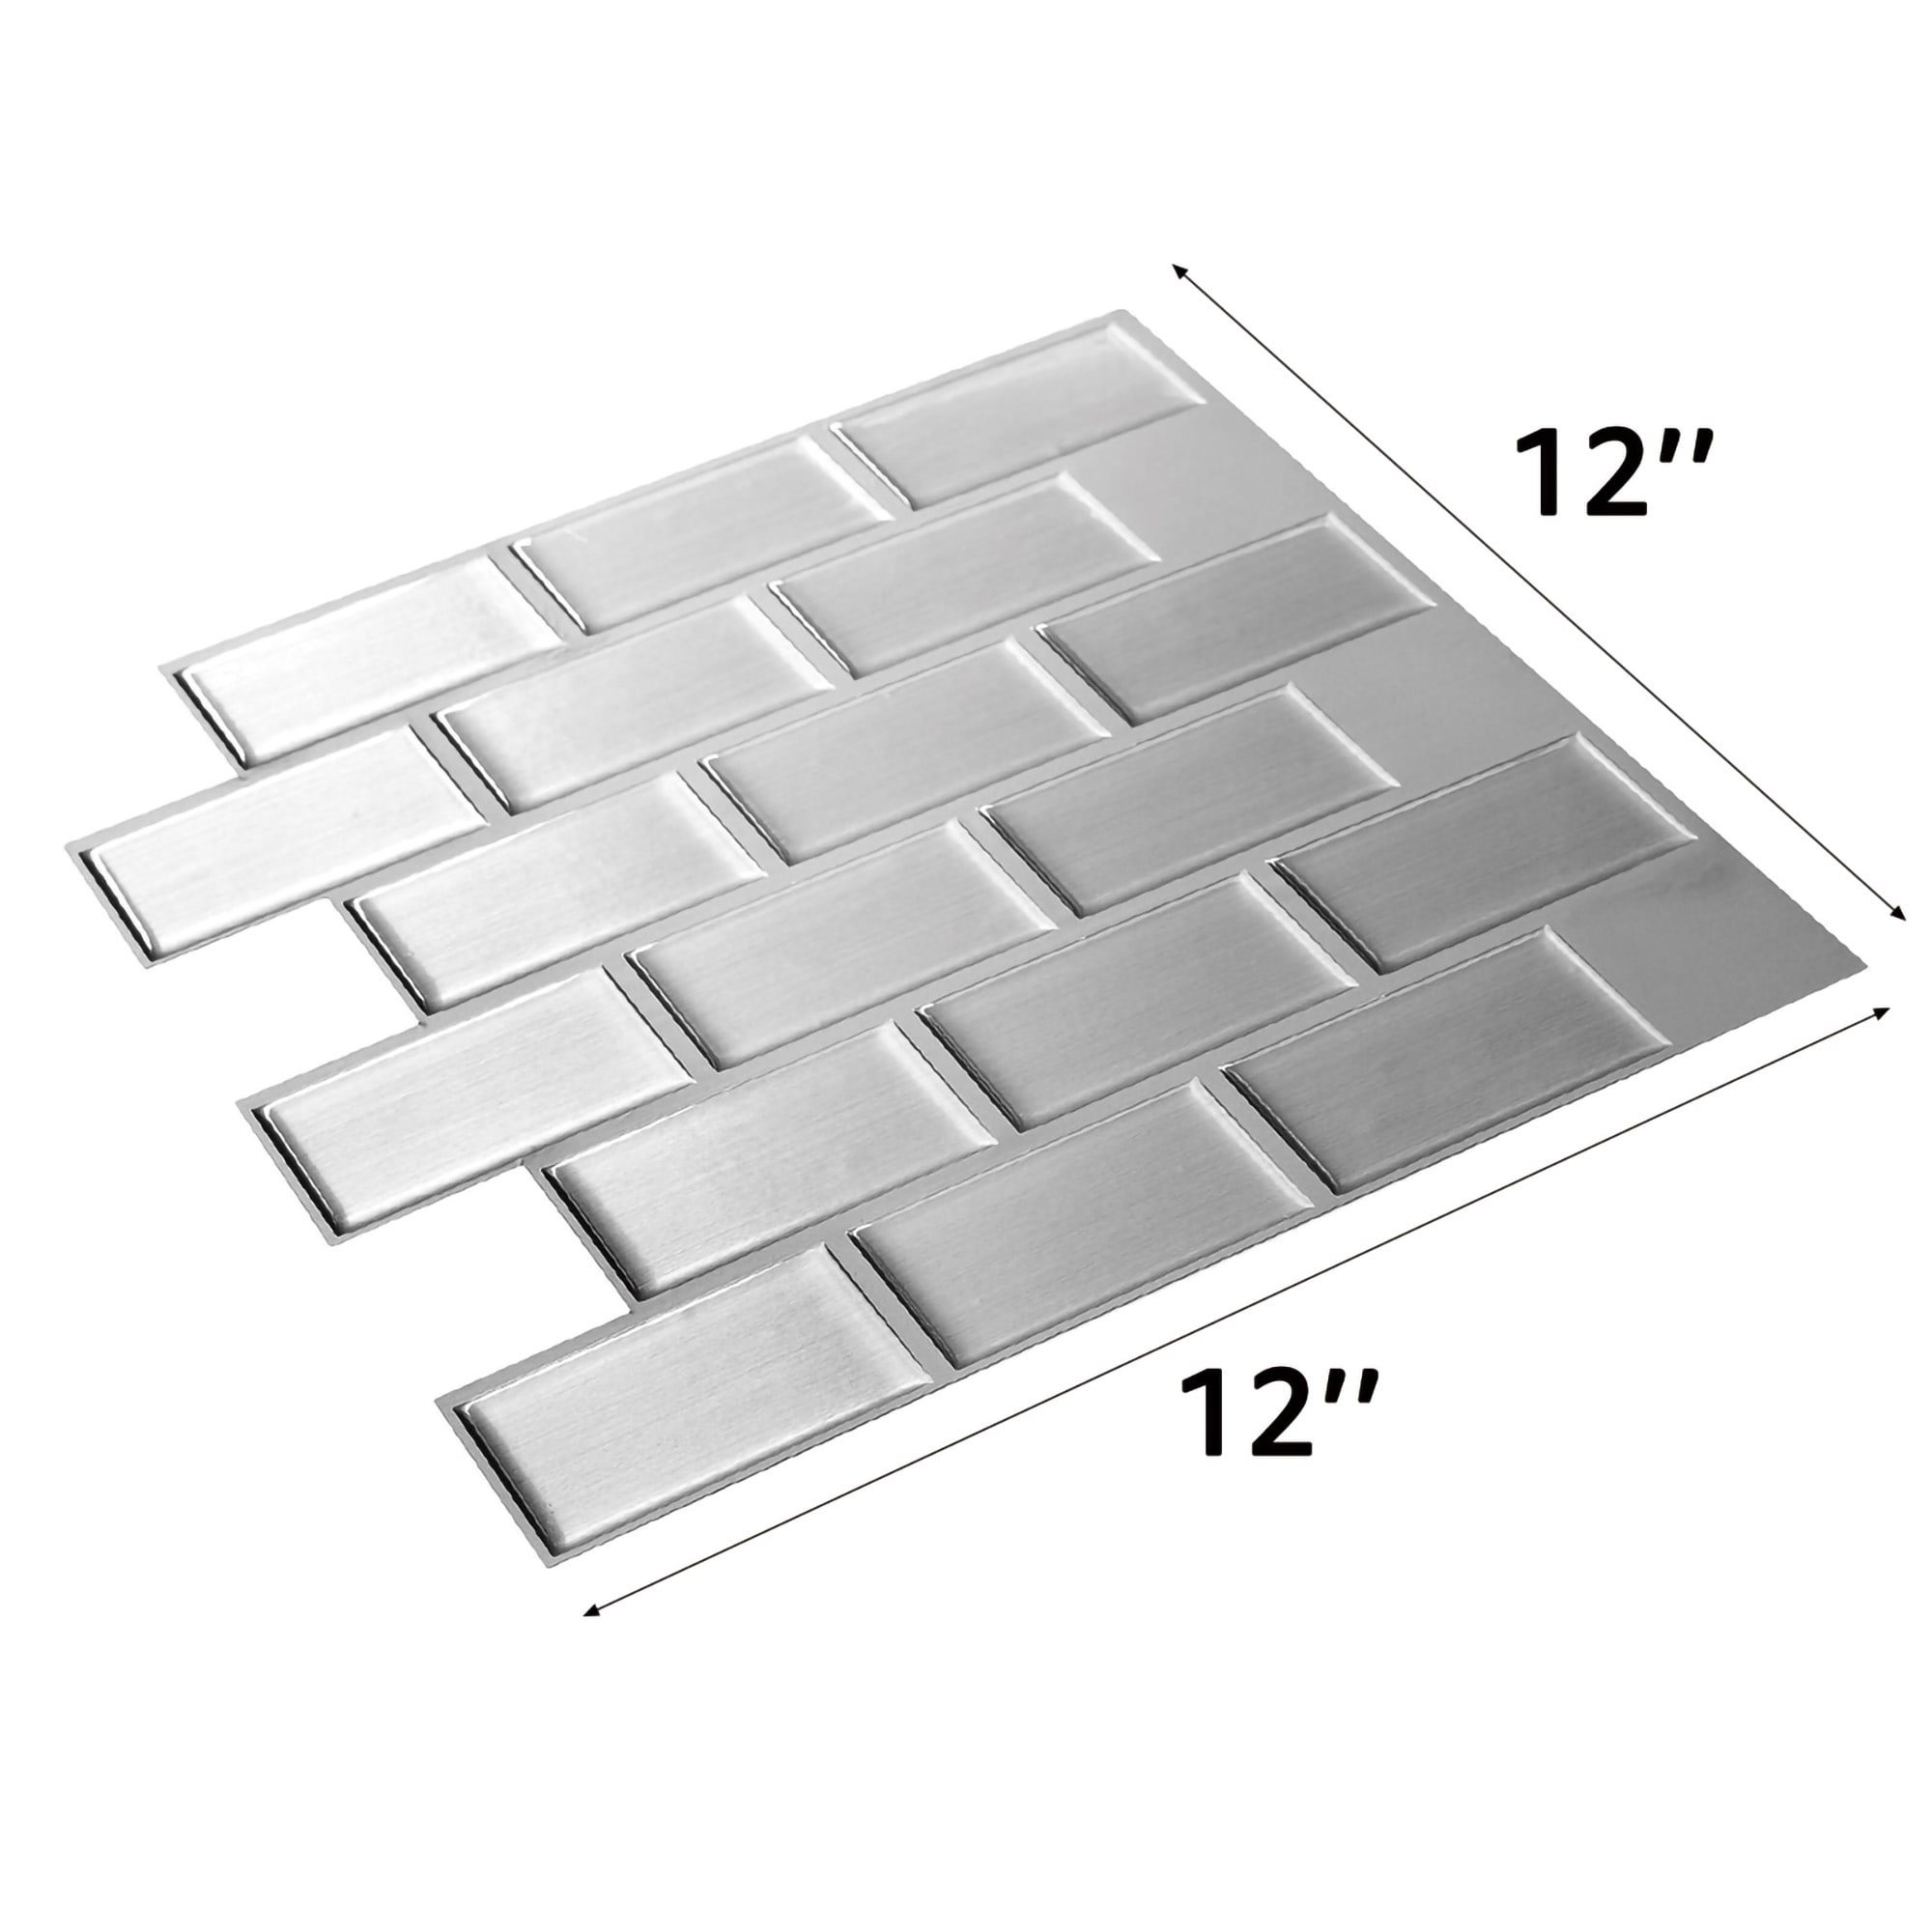 12' X 12' Square & Rectangle Stick on Metal Tile Stainless Steel